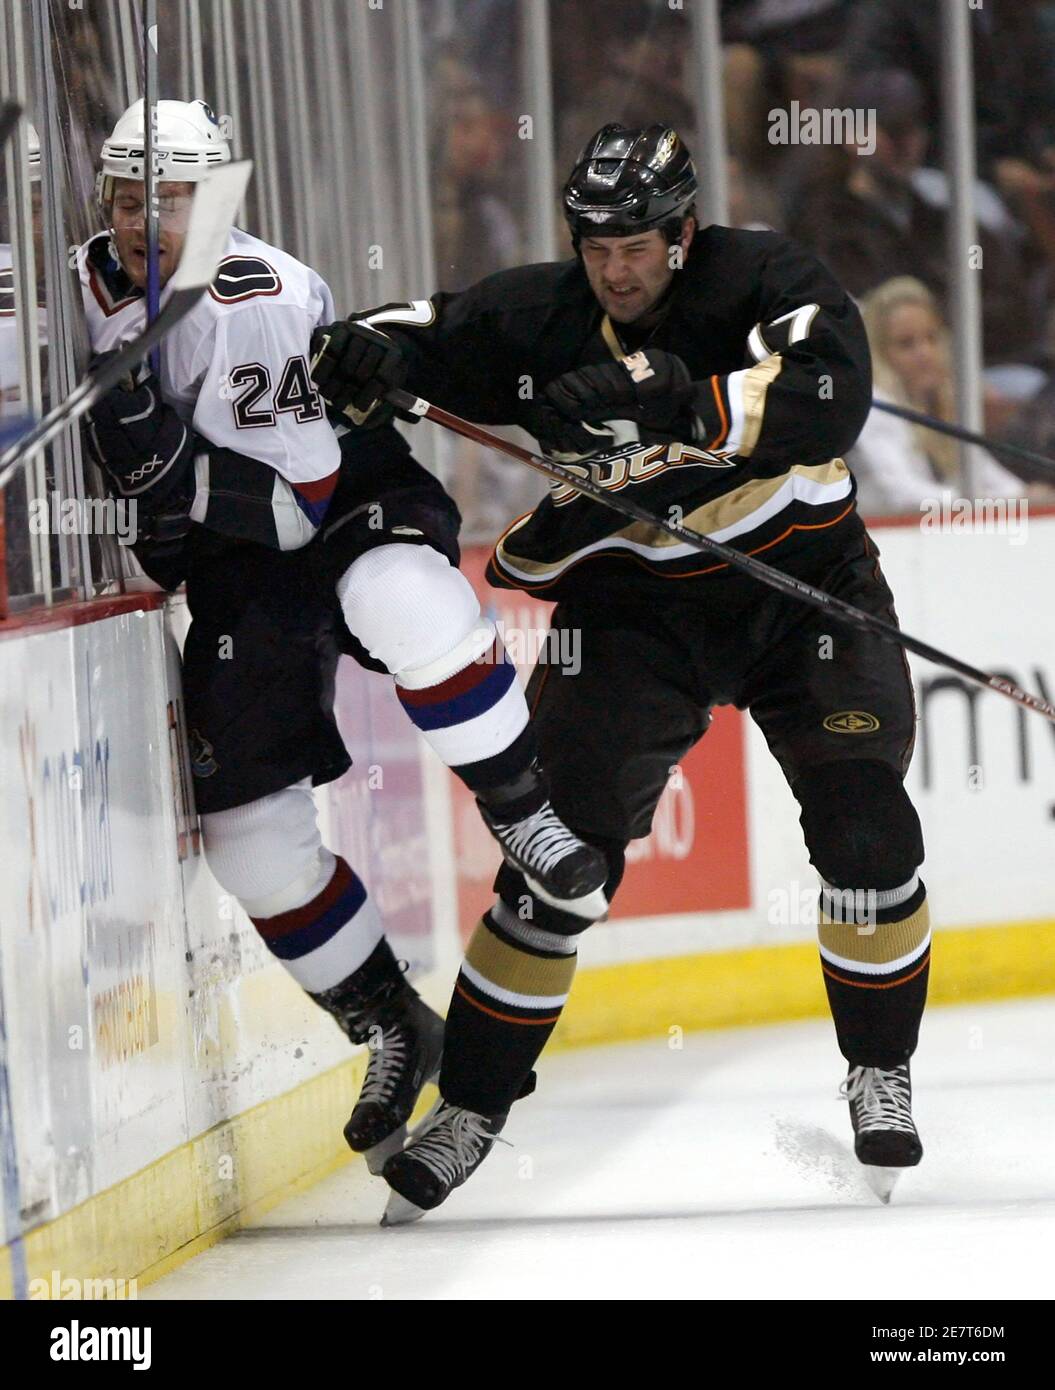 Vancouver Canucks' Matt Cooke (L) gets checked by Anaheim Ducks' Dustin Penner during the first period of their NHL hockey game in Anaheim March 11, 2007. REUTERS/Gus Ruelas (UNITED STATES) Stock Photo